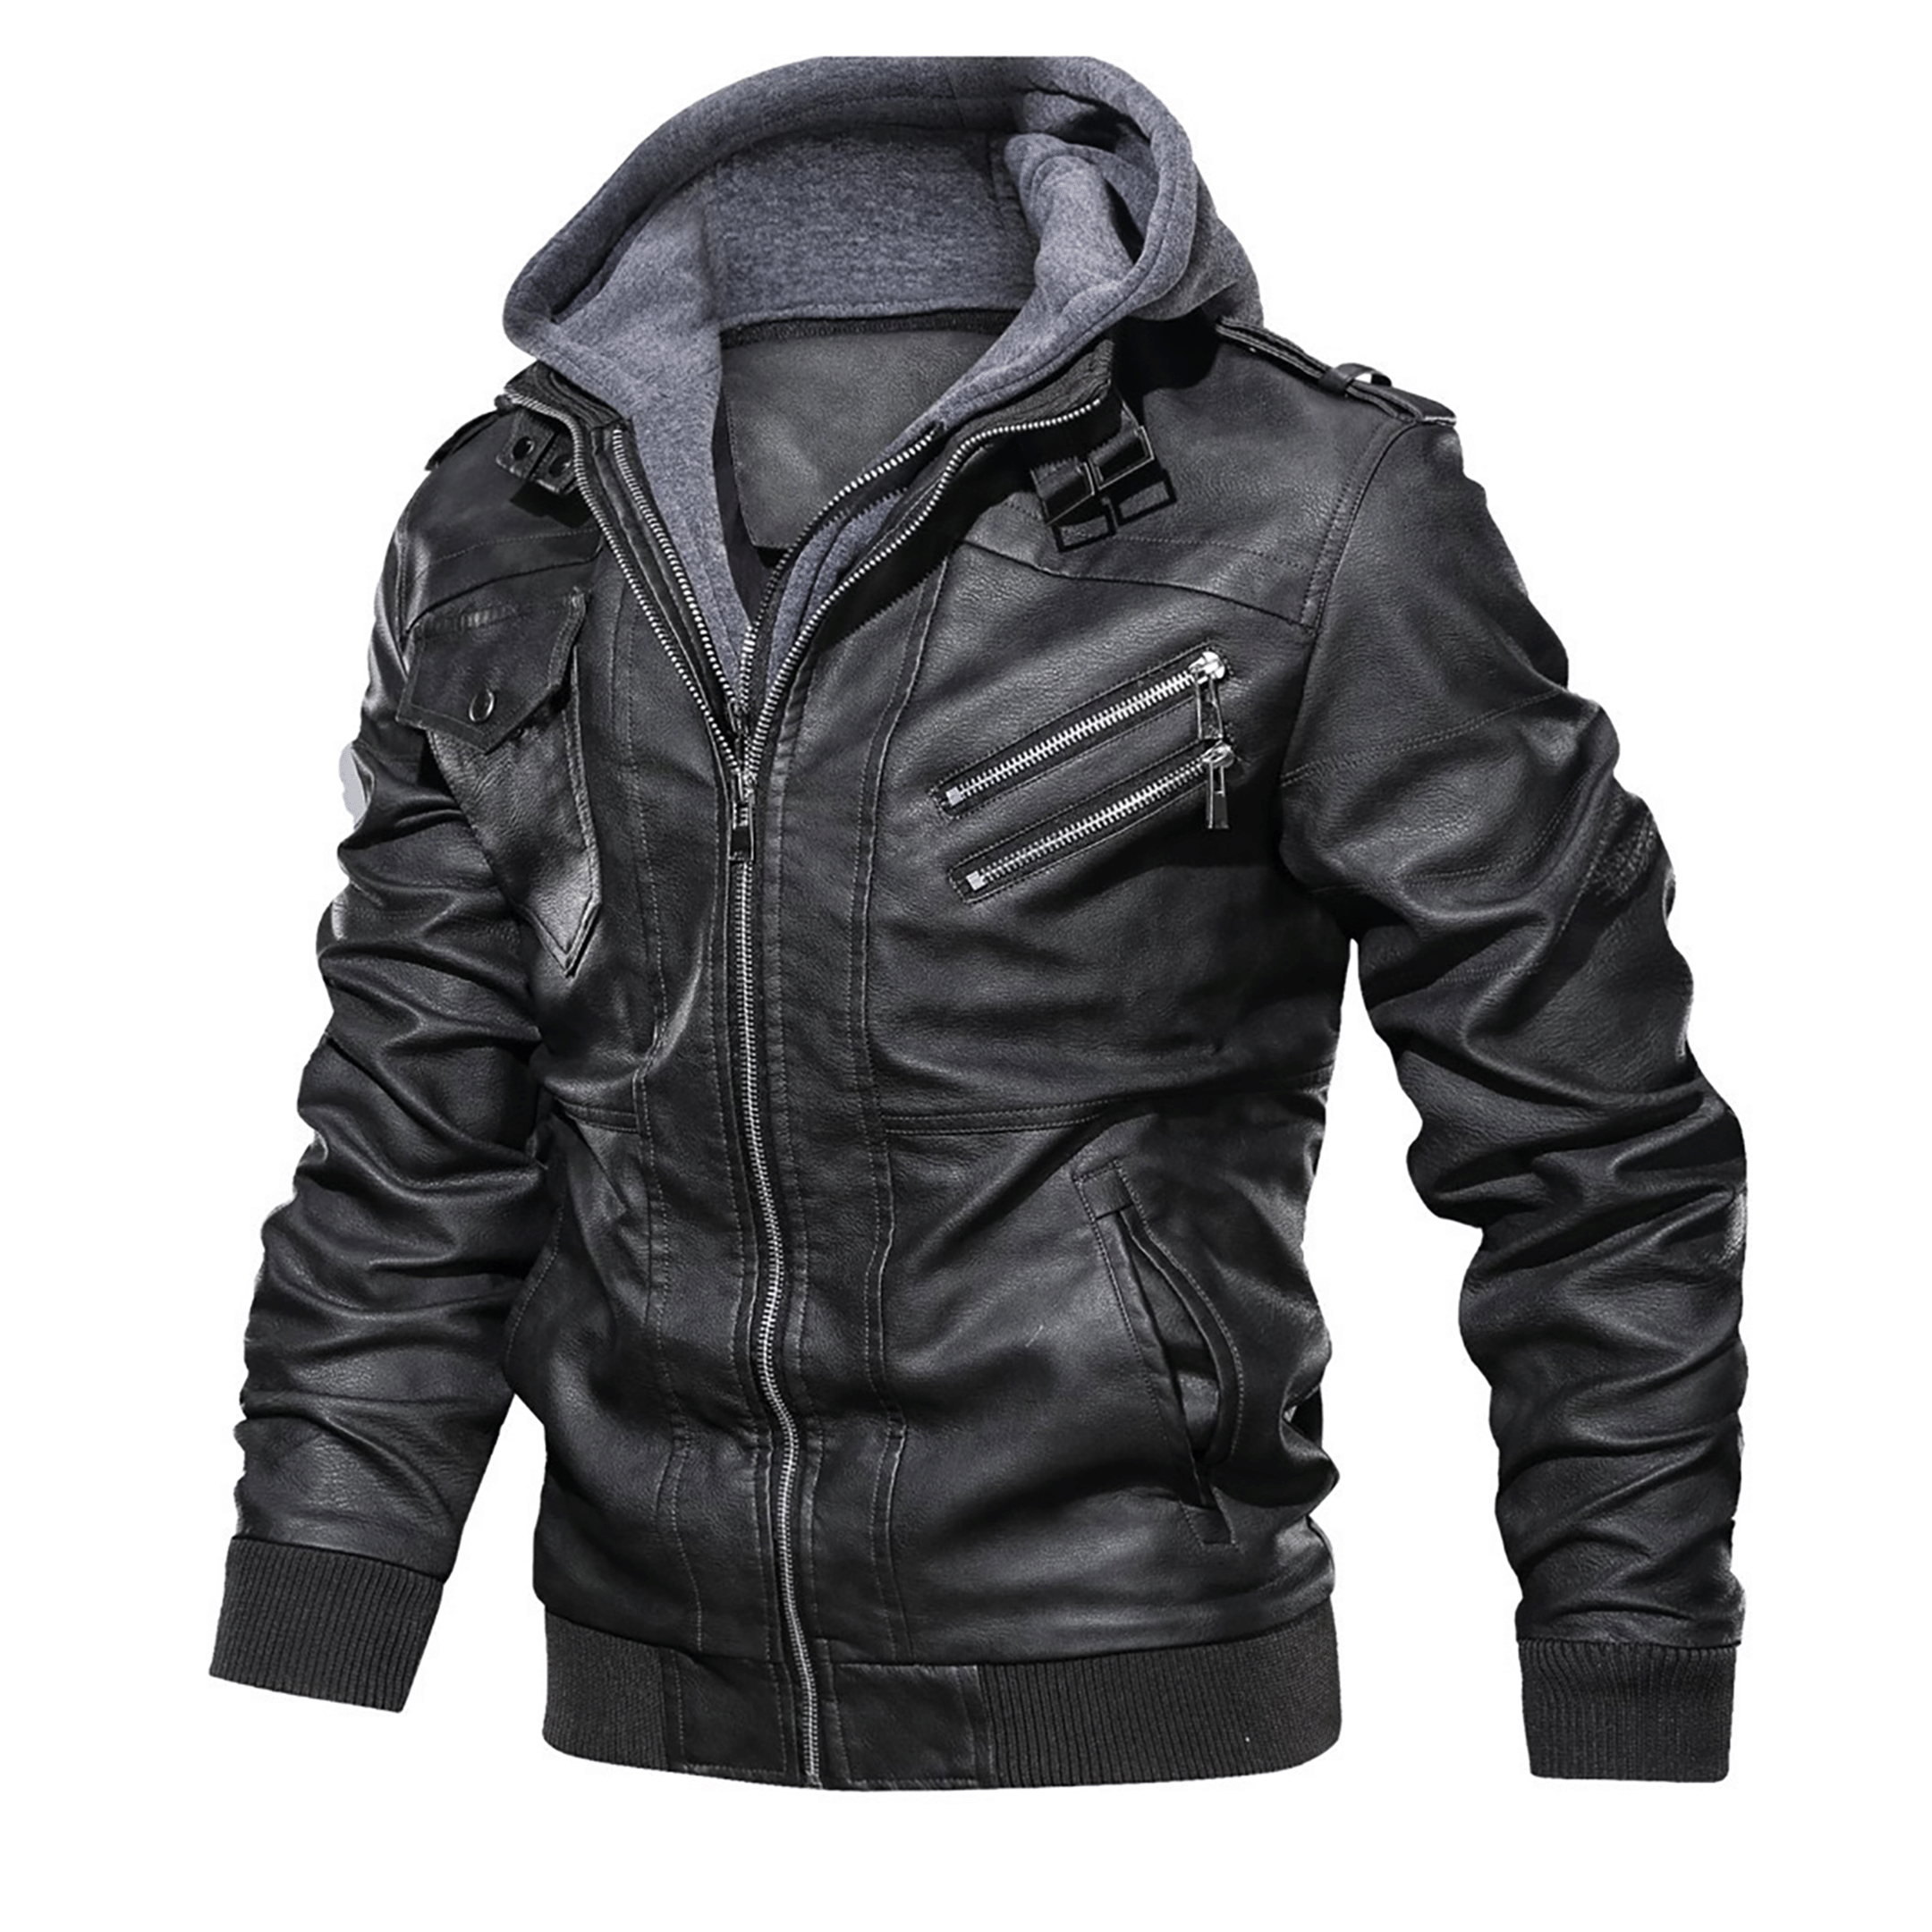 Top leather jackets and latest products 157